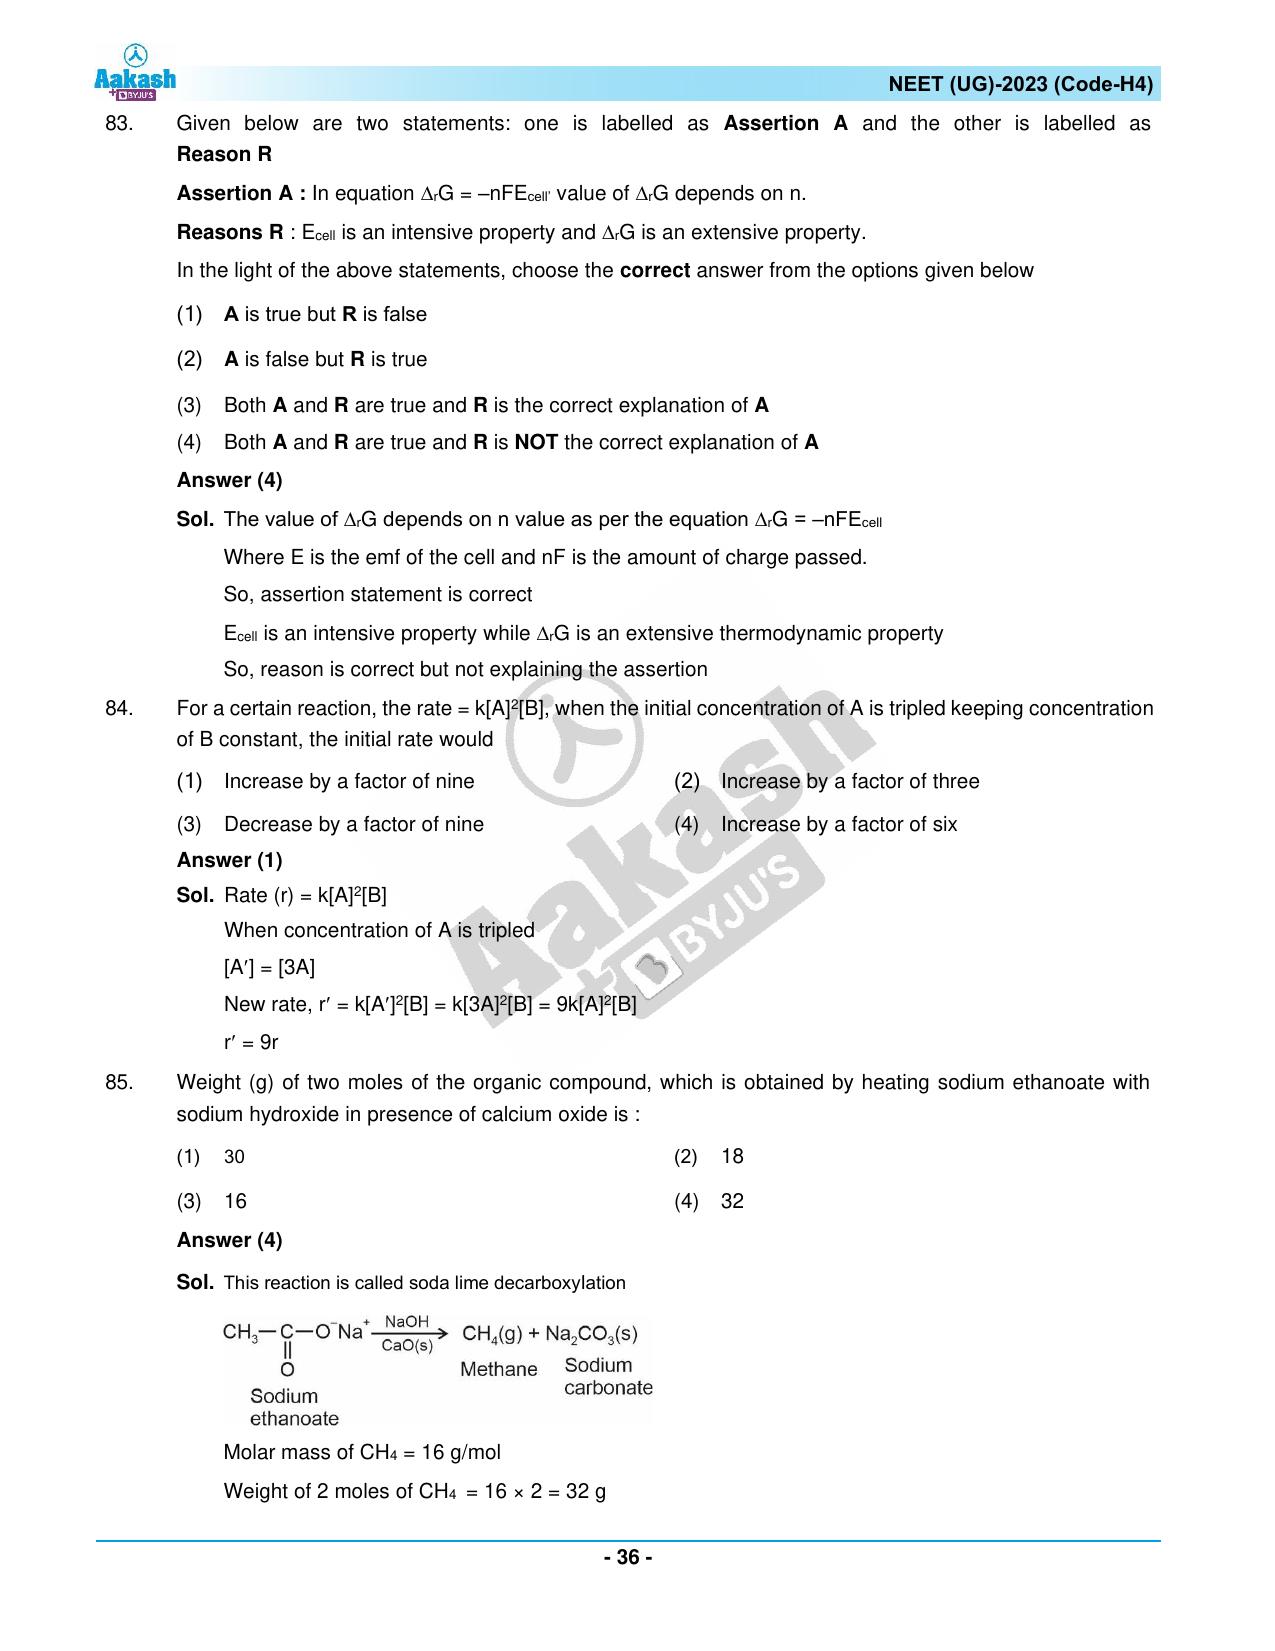 NEET 2023 Question Paper H4 - Page 36